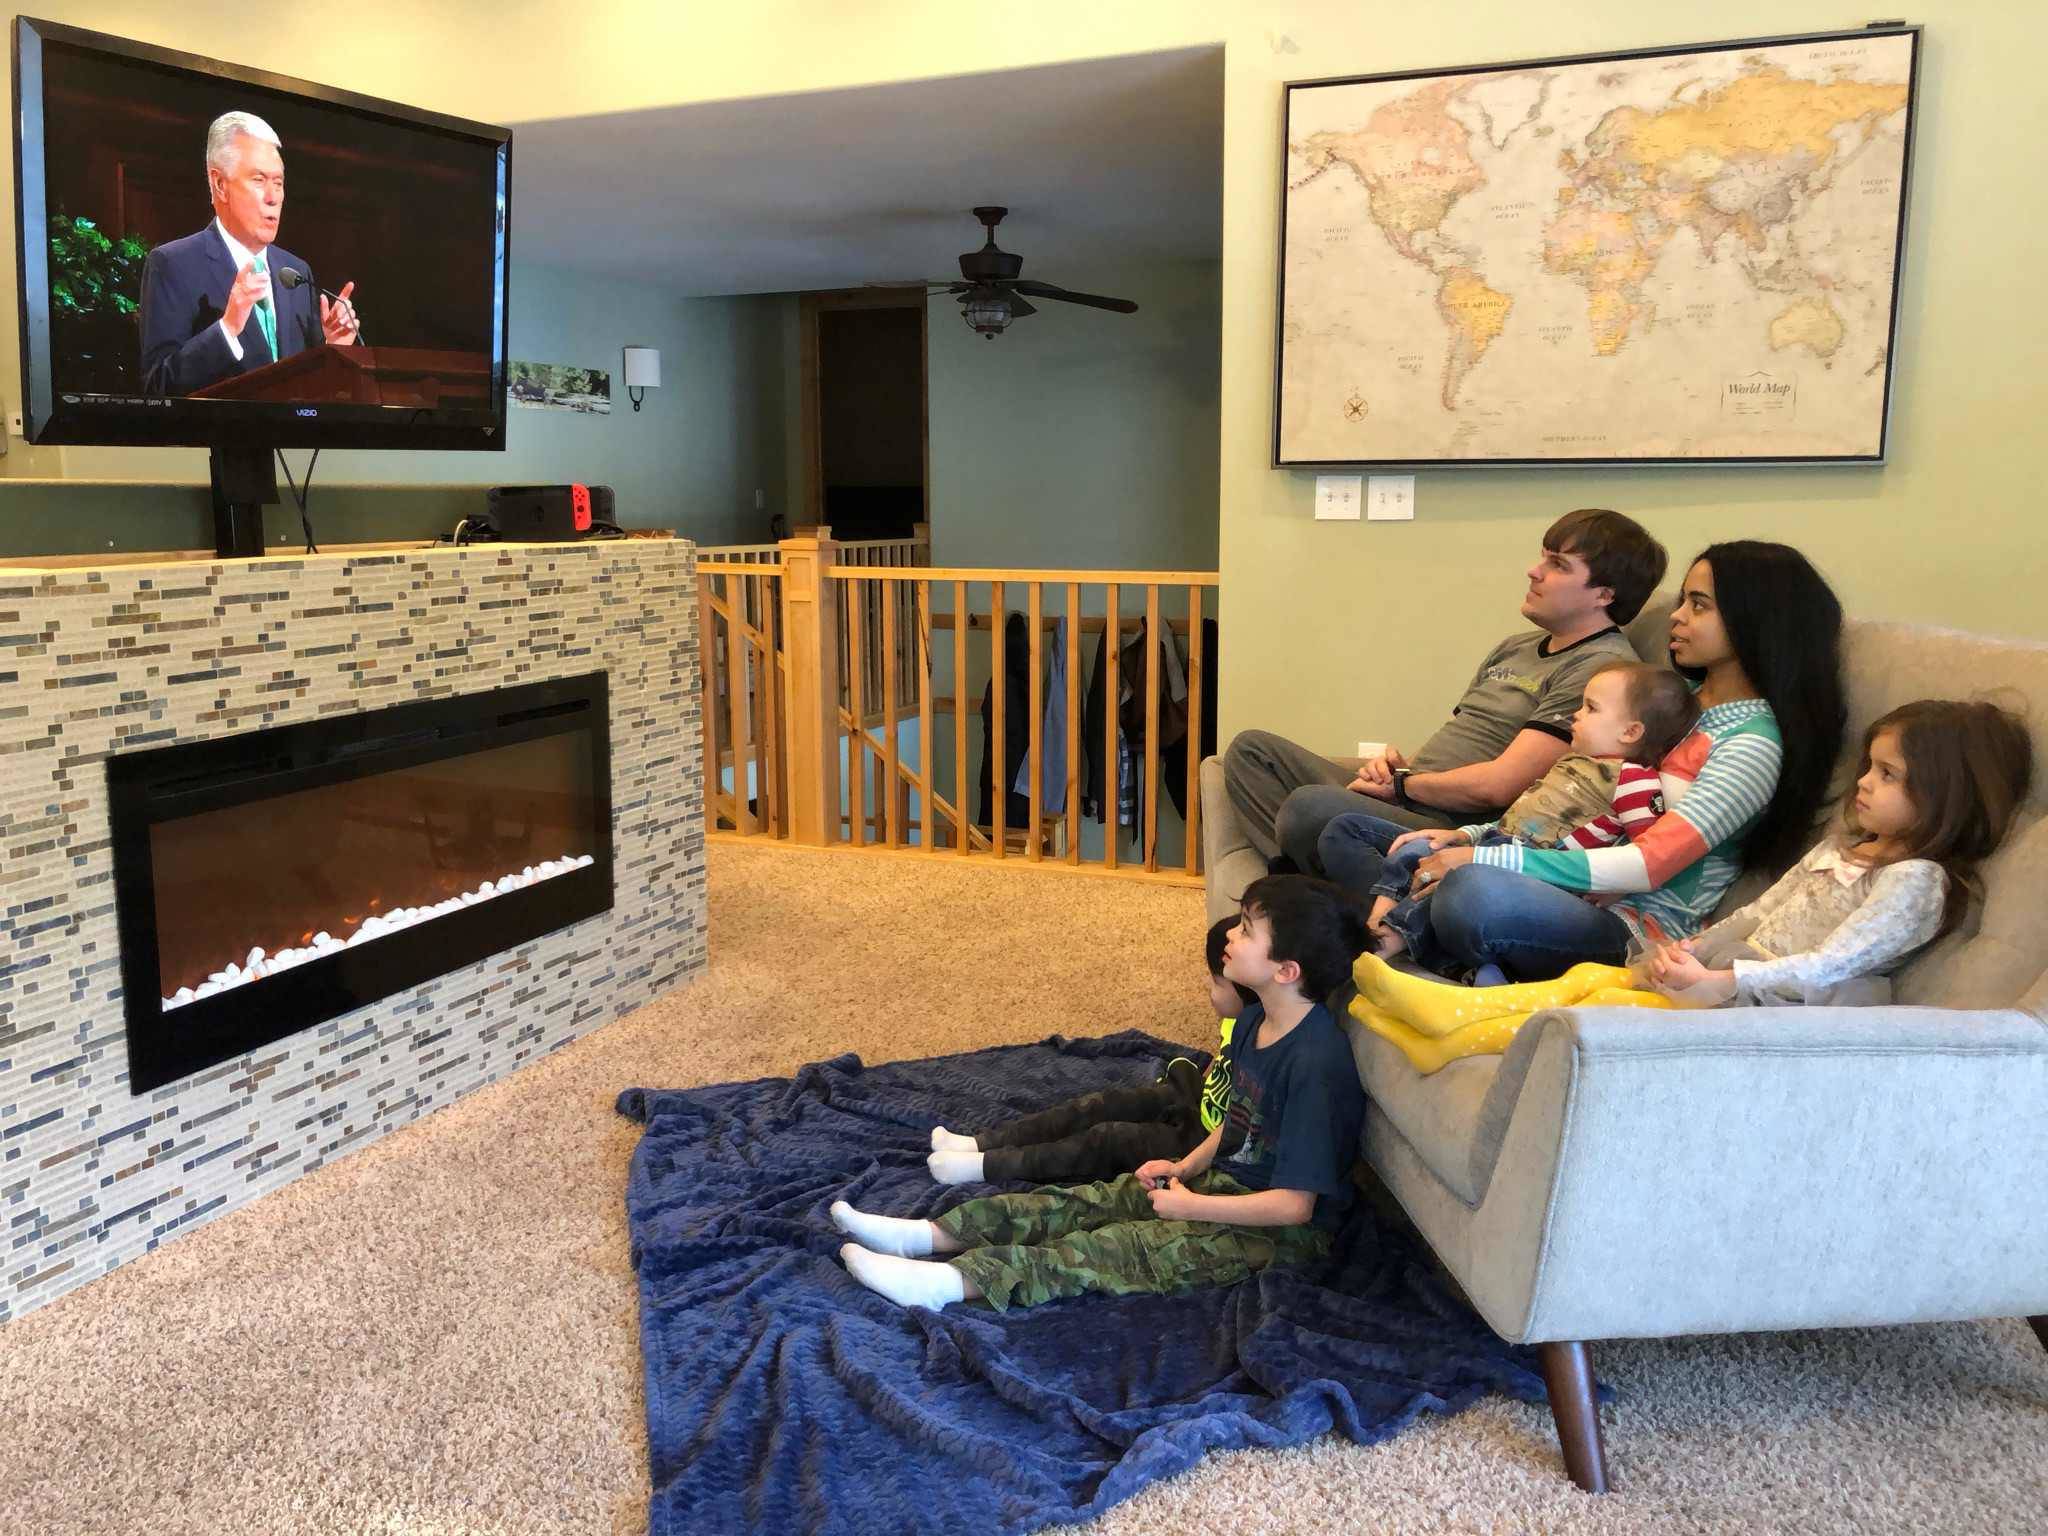 The Clancey Family - James, Brittani, Thomas, Kaiya, Chase and Stuart watching General Conference. (Photo by Jacqueline Tupou)